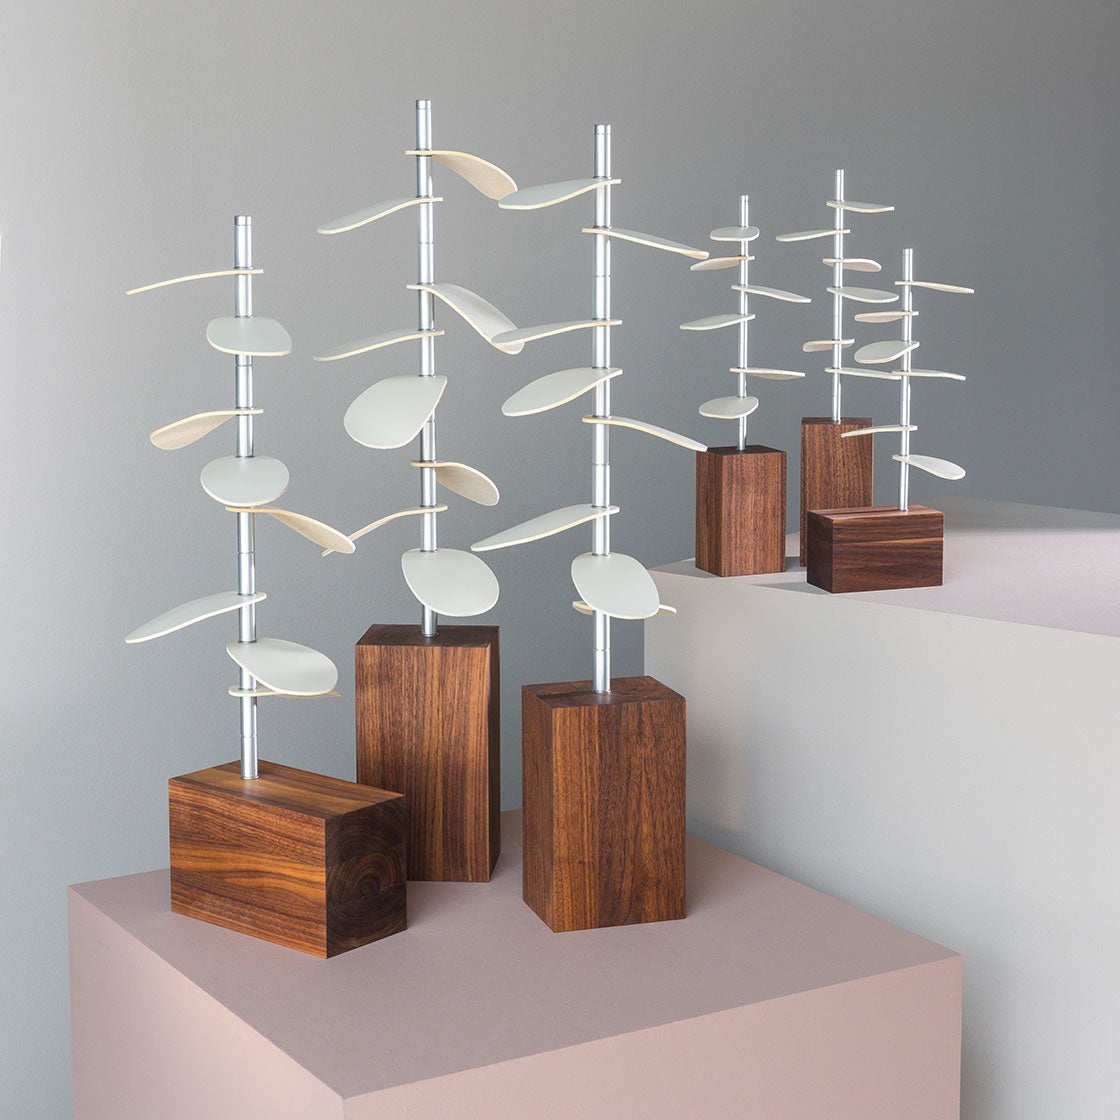 murmur trees are sculptural objects made of walnut and leather